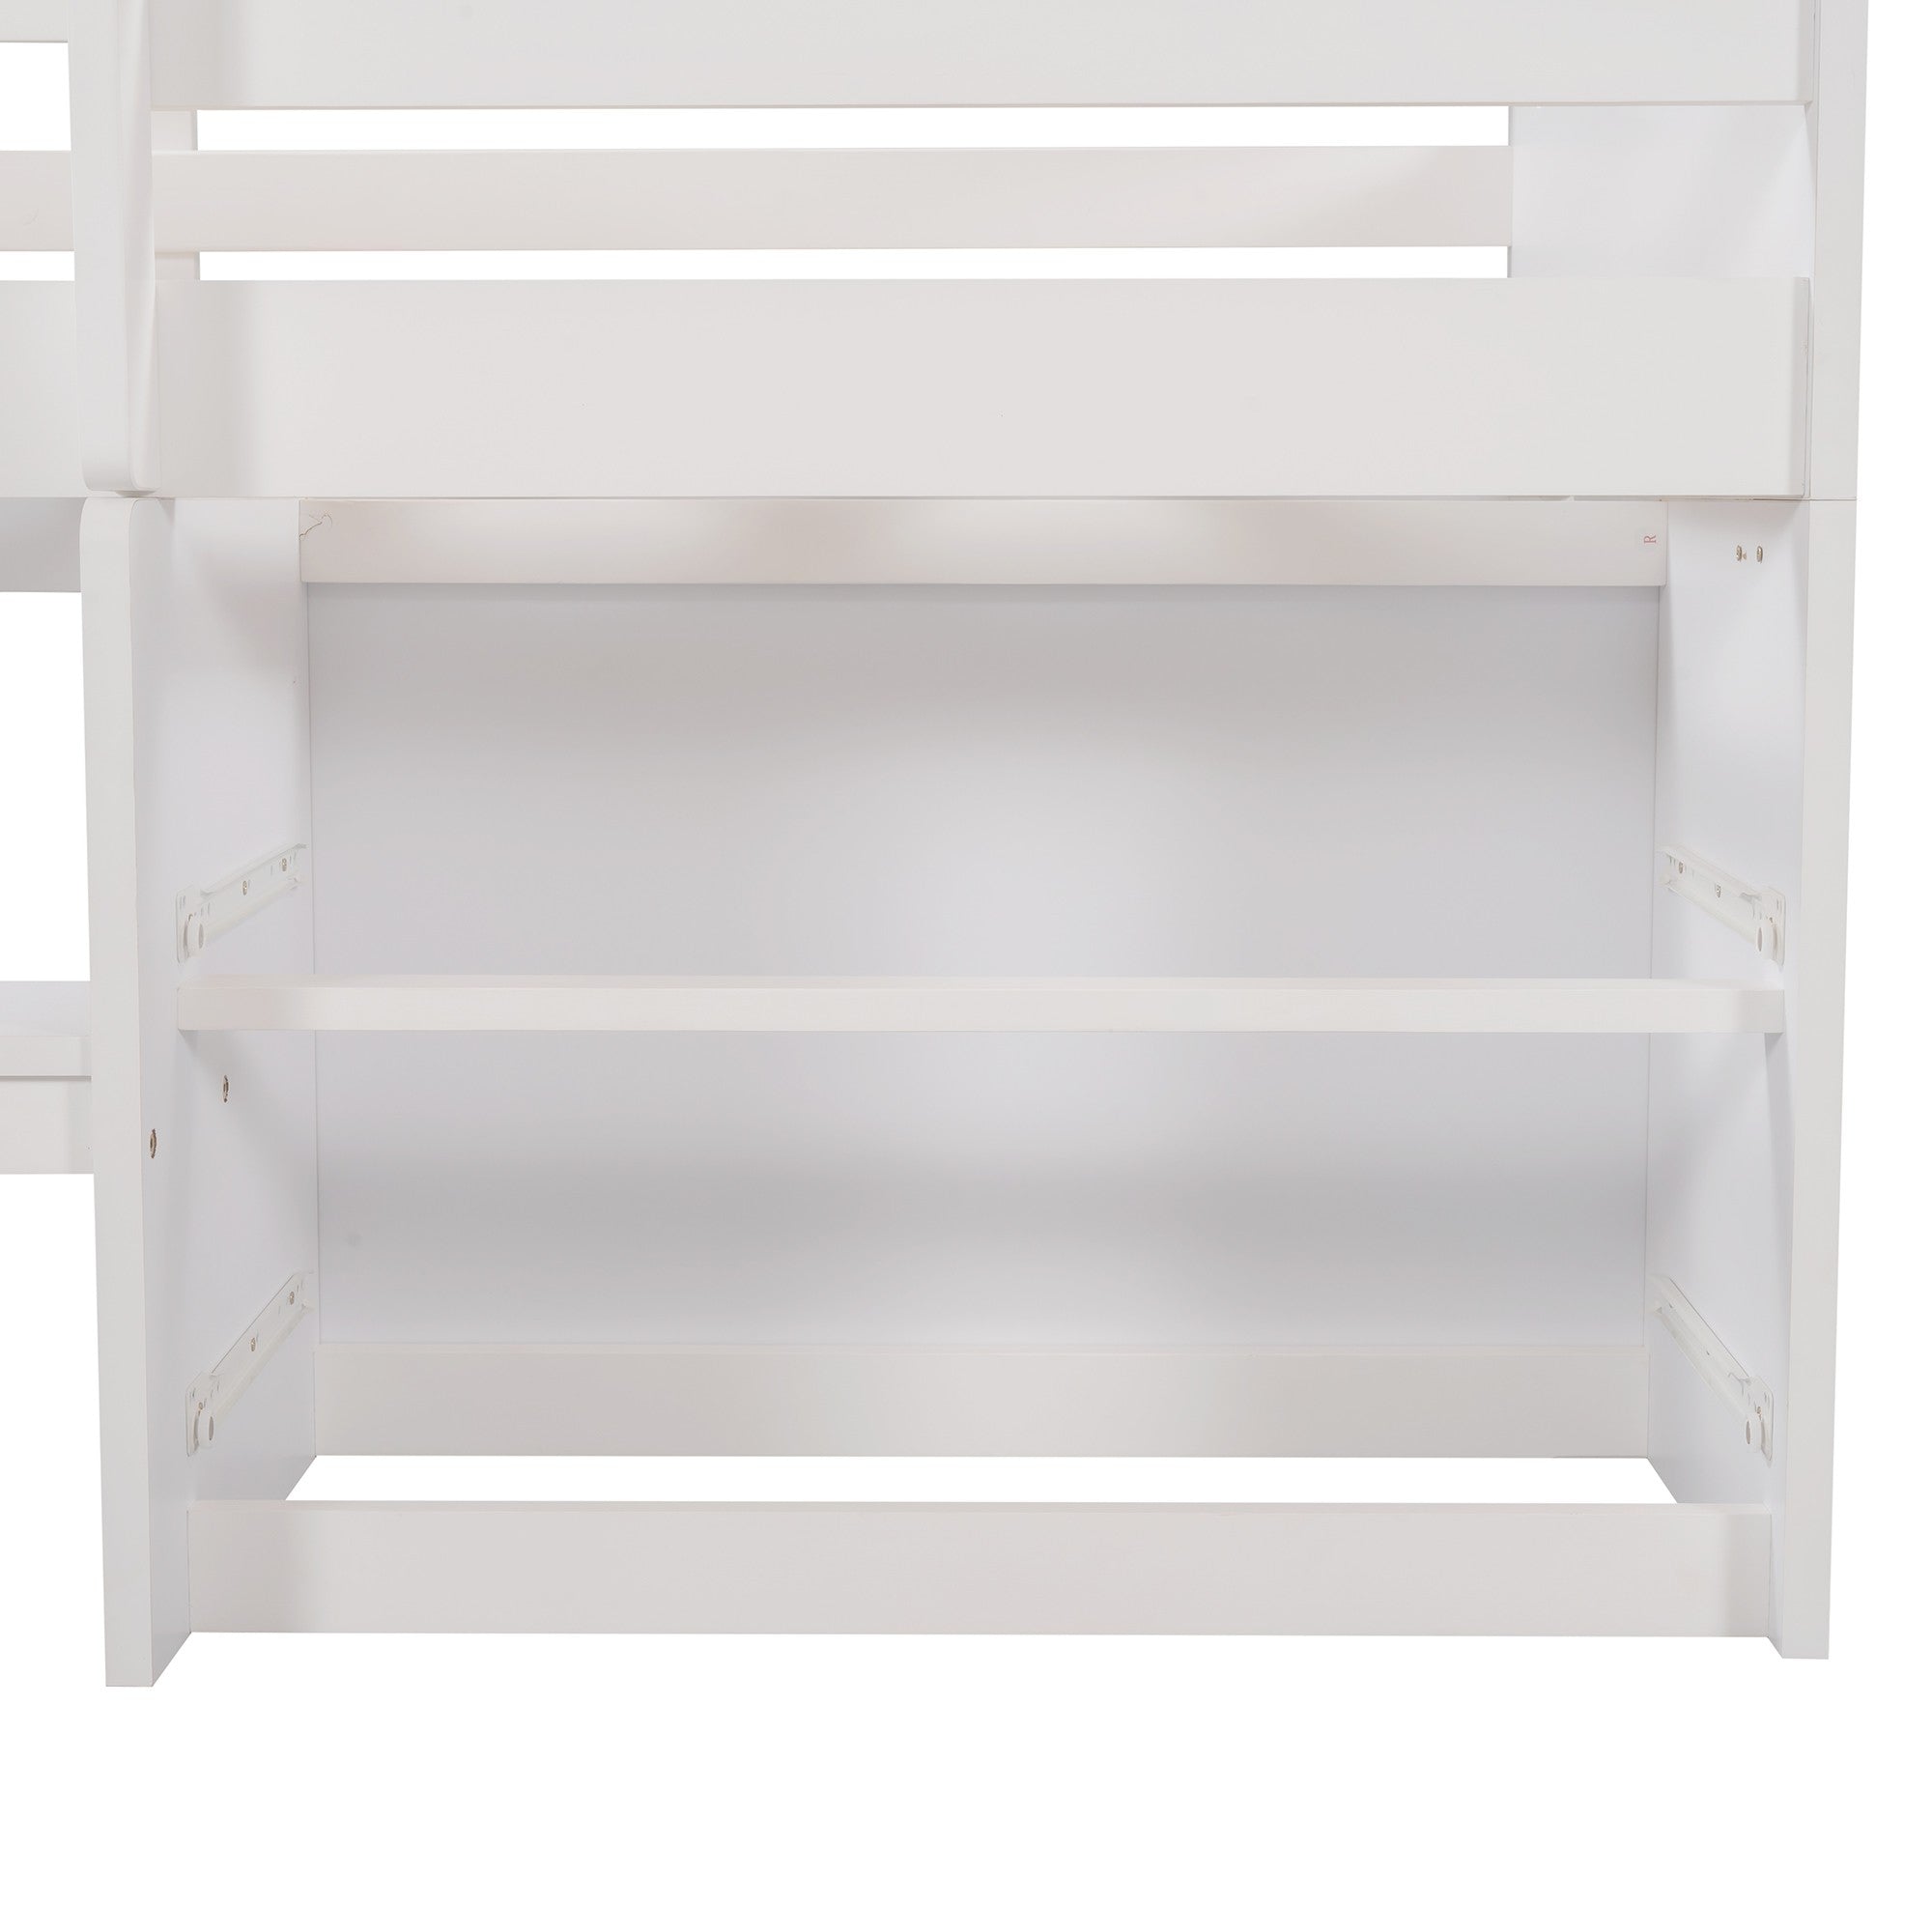 White Twin Size Low Loft Bed With Shelves and Drawers